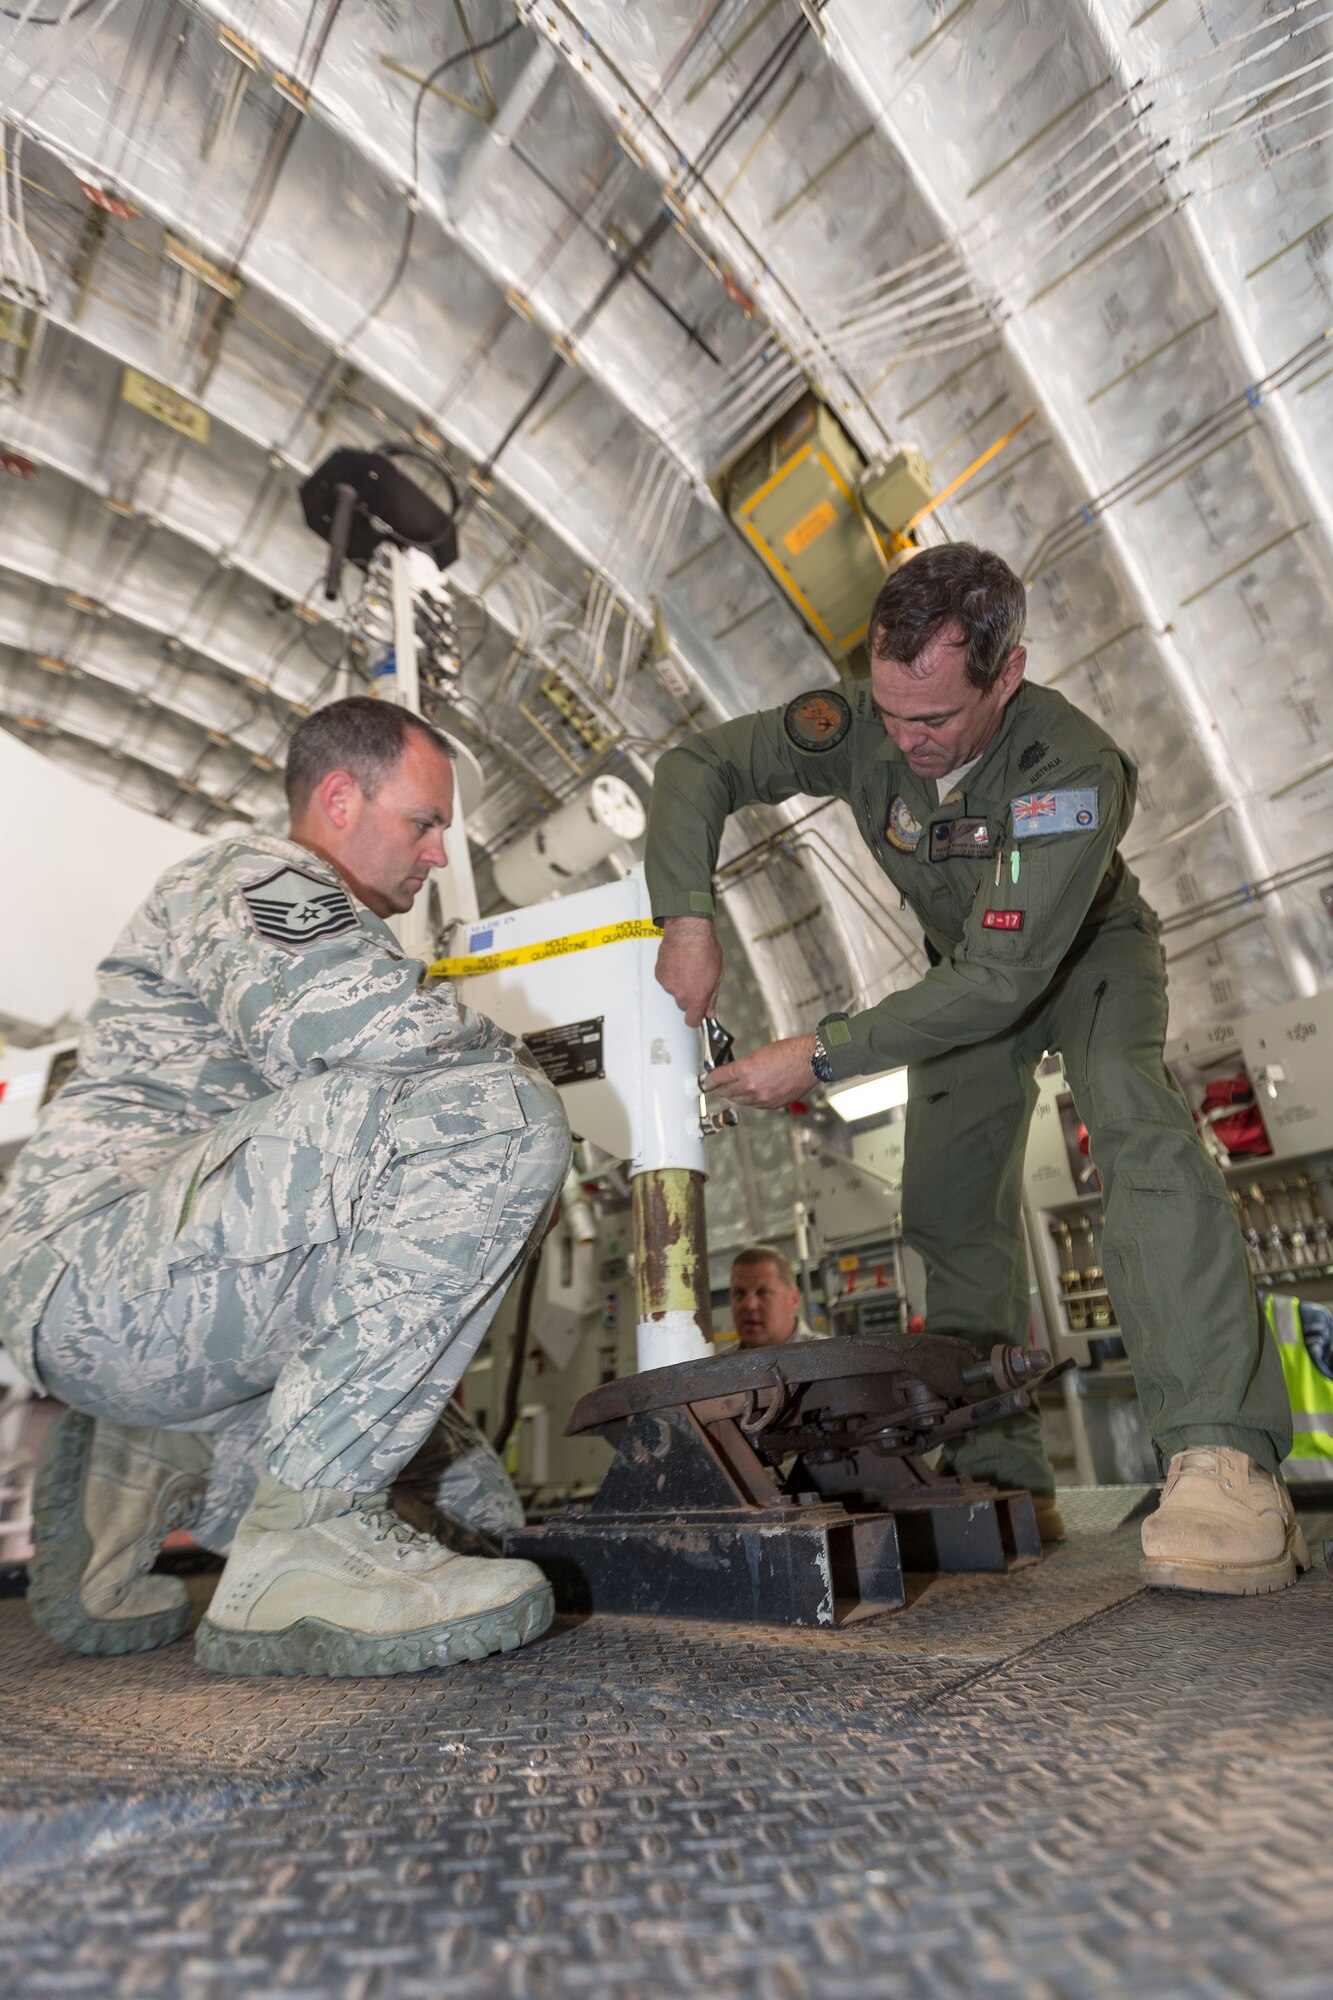 U.S. Air Force Master Sgt. Donald Taylor, with the 266th Range Squadron, deployed from Mountain Home Air Force Base, Idaho, and Royal Australian Air Force (RAAF) Warrant Officer Dwayne Taylor, with No 36 Squadron, prepare to lower a trailer to the hitch on board a C-17A during Pitch Black 16, in Darwin, Australia, Aug. 2, 2016. Pitch Black is a biennial multinational air warfare exercise hosted by the RAAF that focuses on offensive counter air and defensive counter air combat in a simulated war environment. (Australian Defence Force photo by Cpl. David Gibbs)